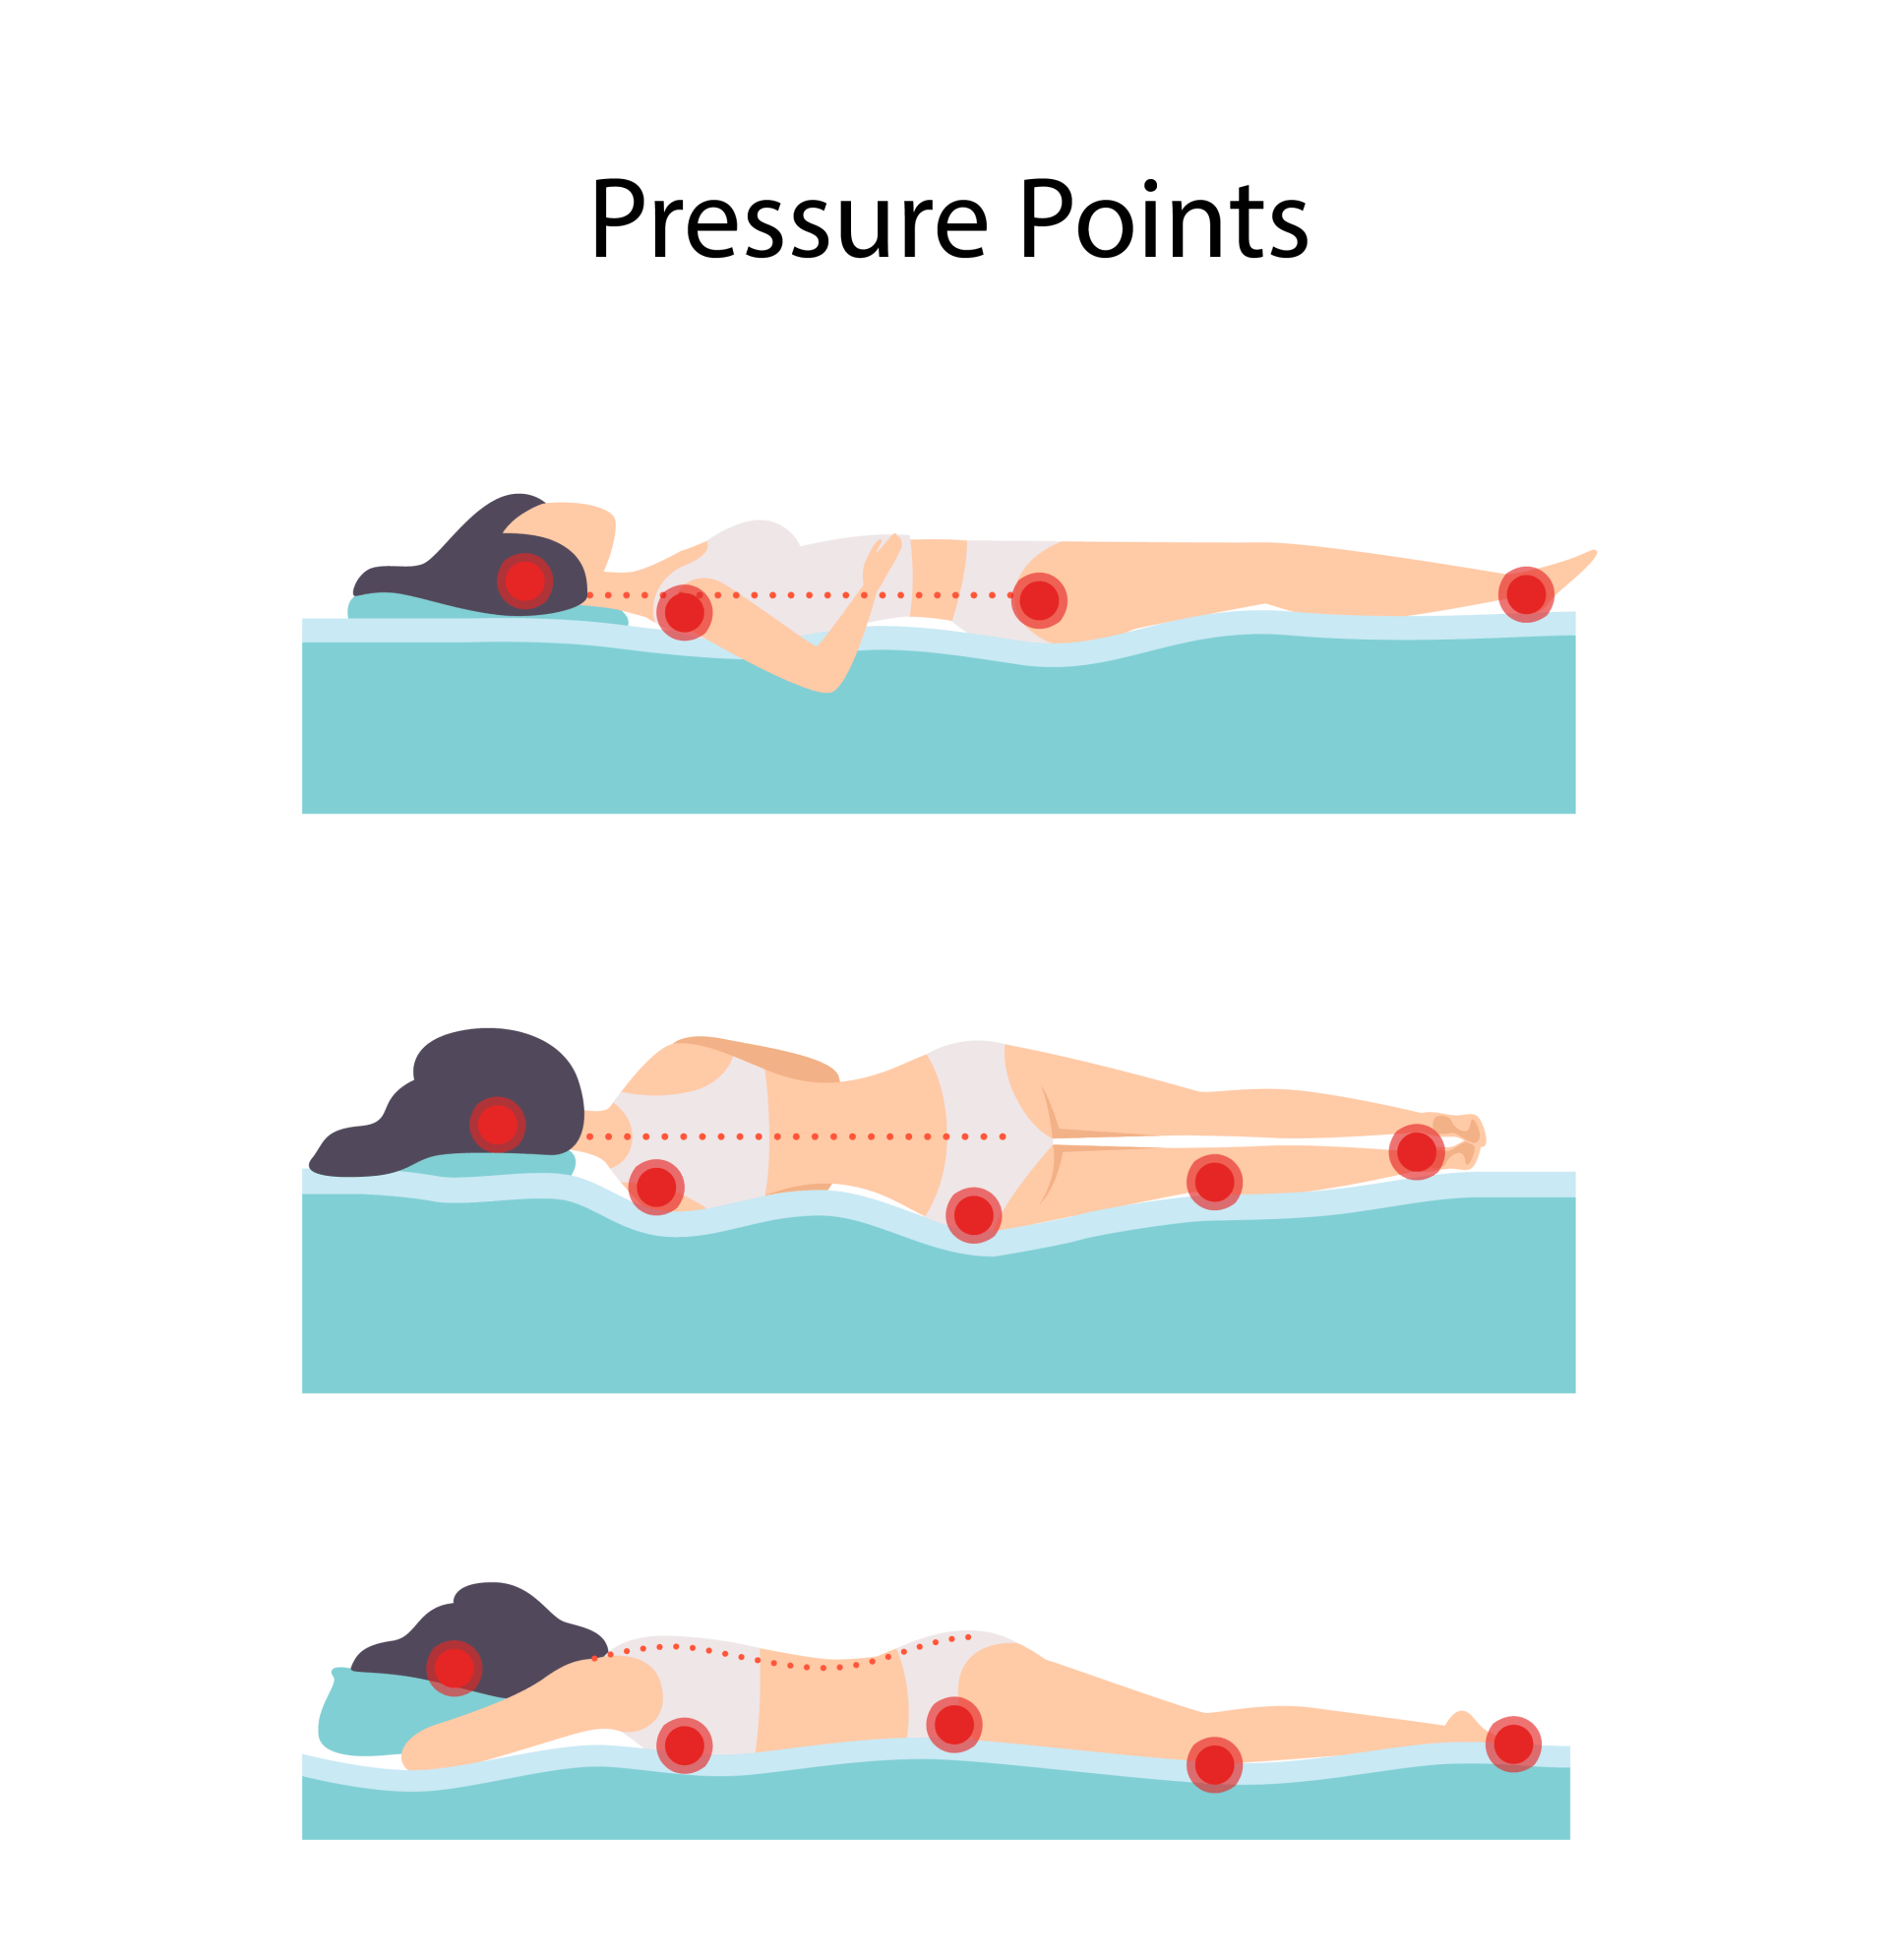 Diagram showing pressure points on the human body